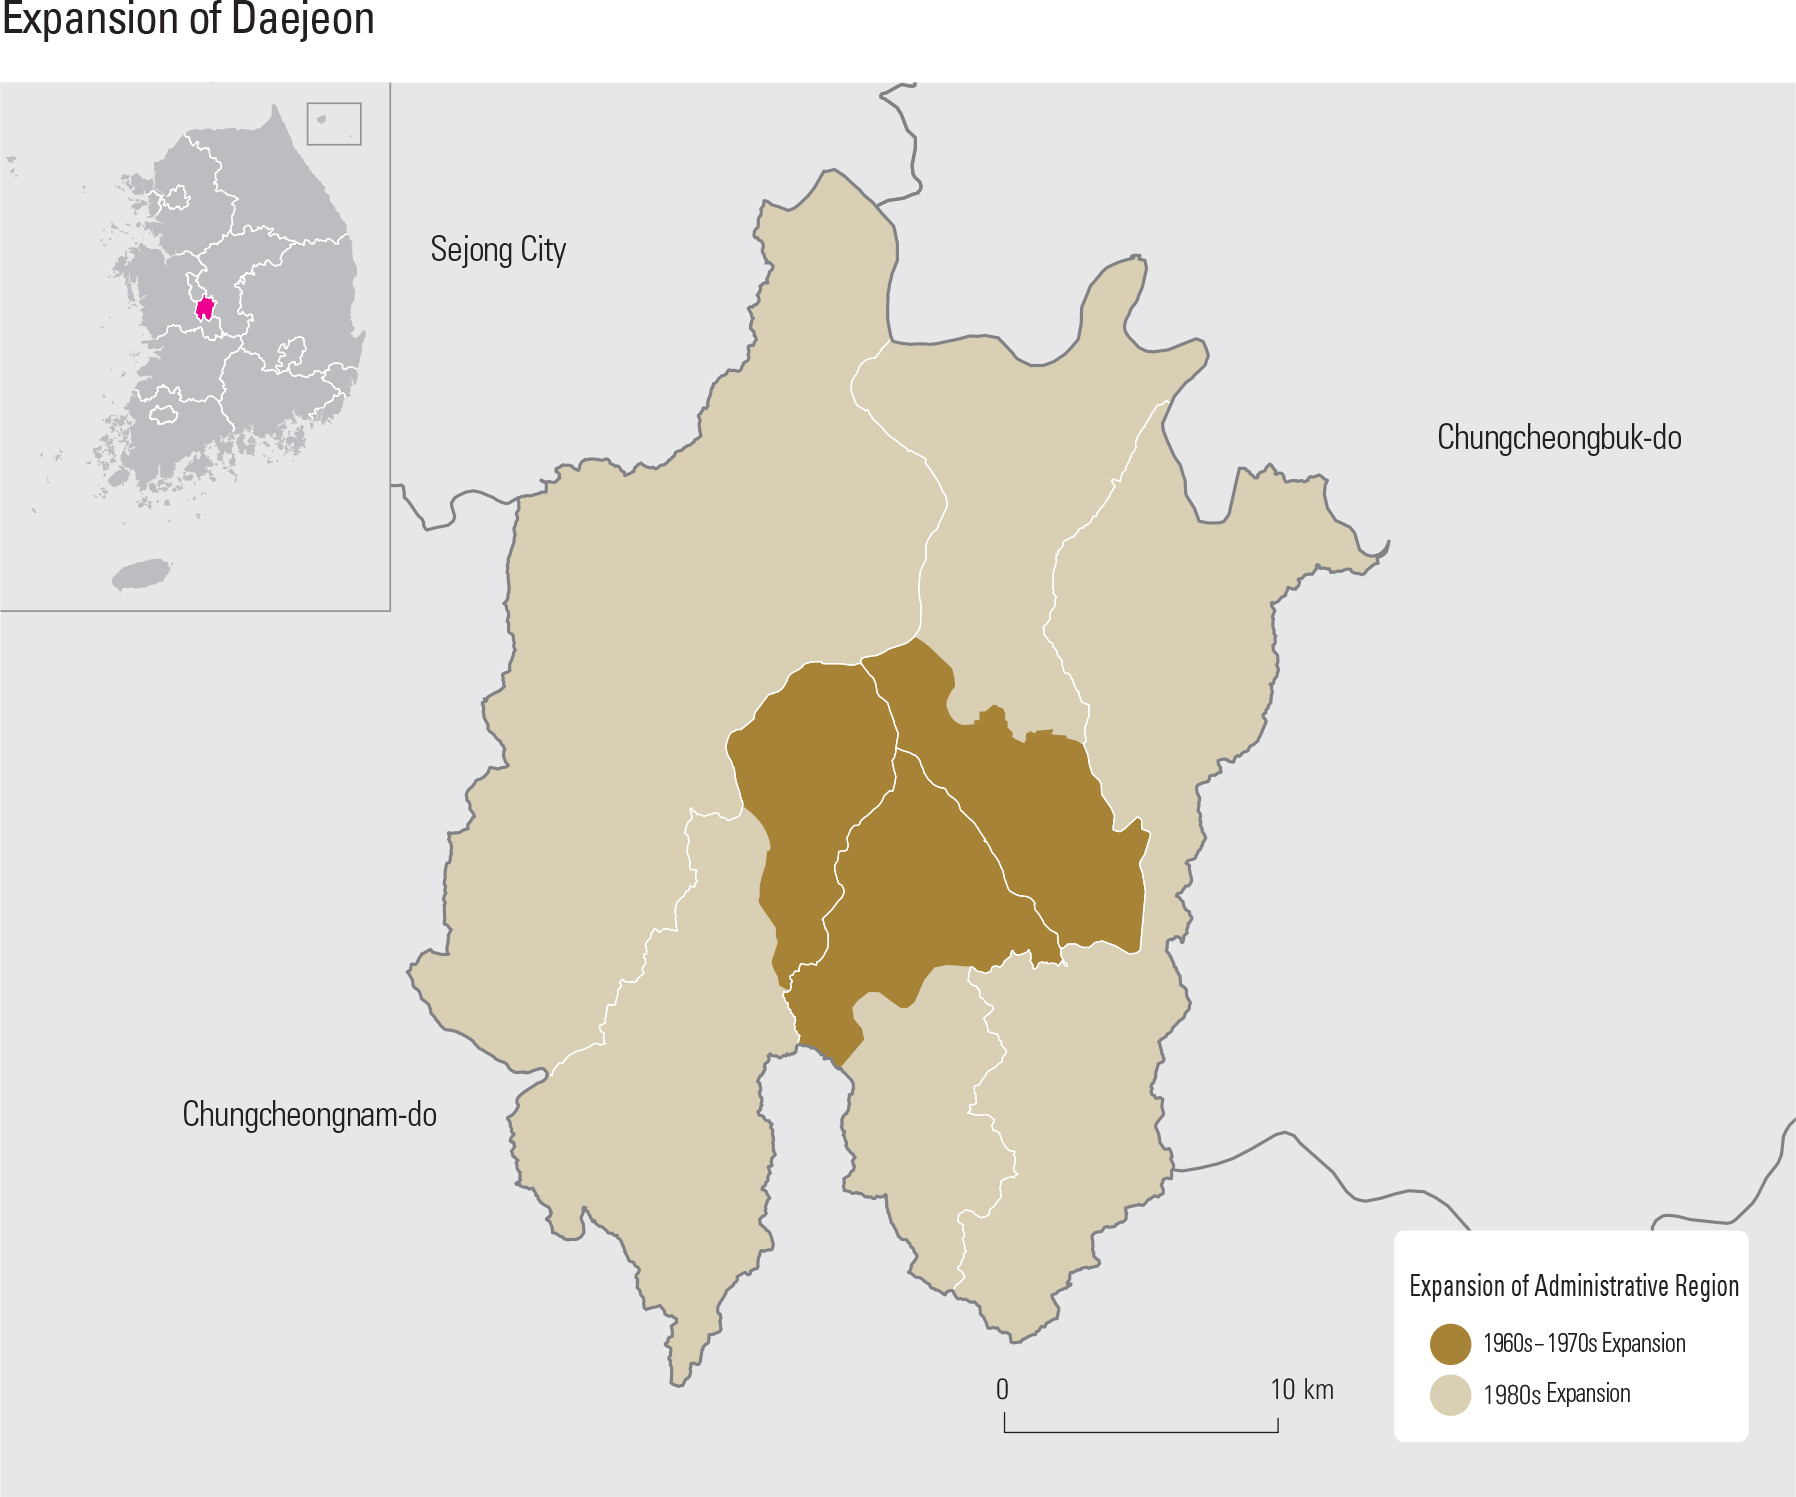  Expansion of Daejeon